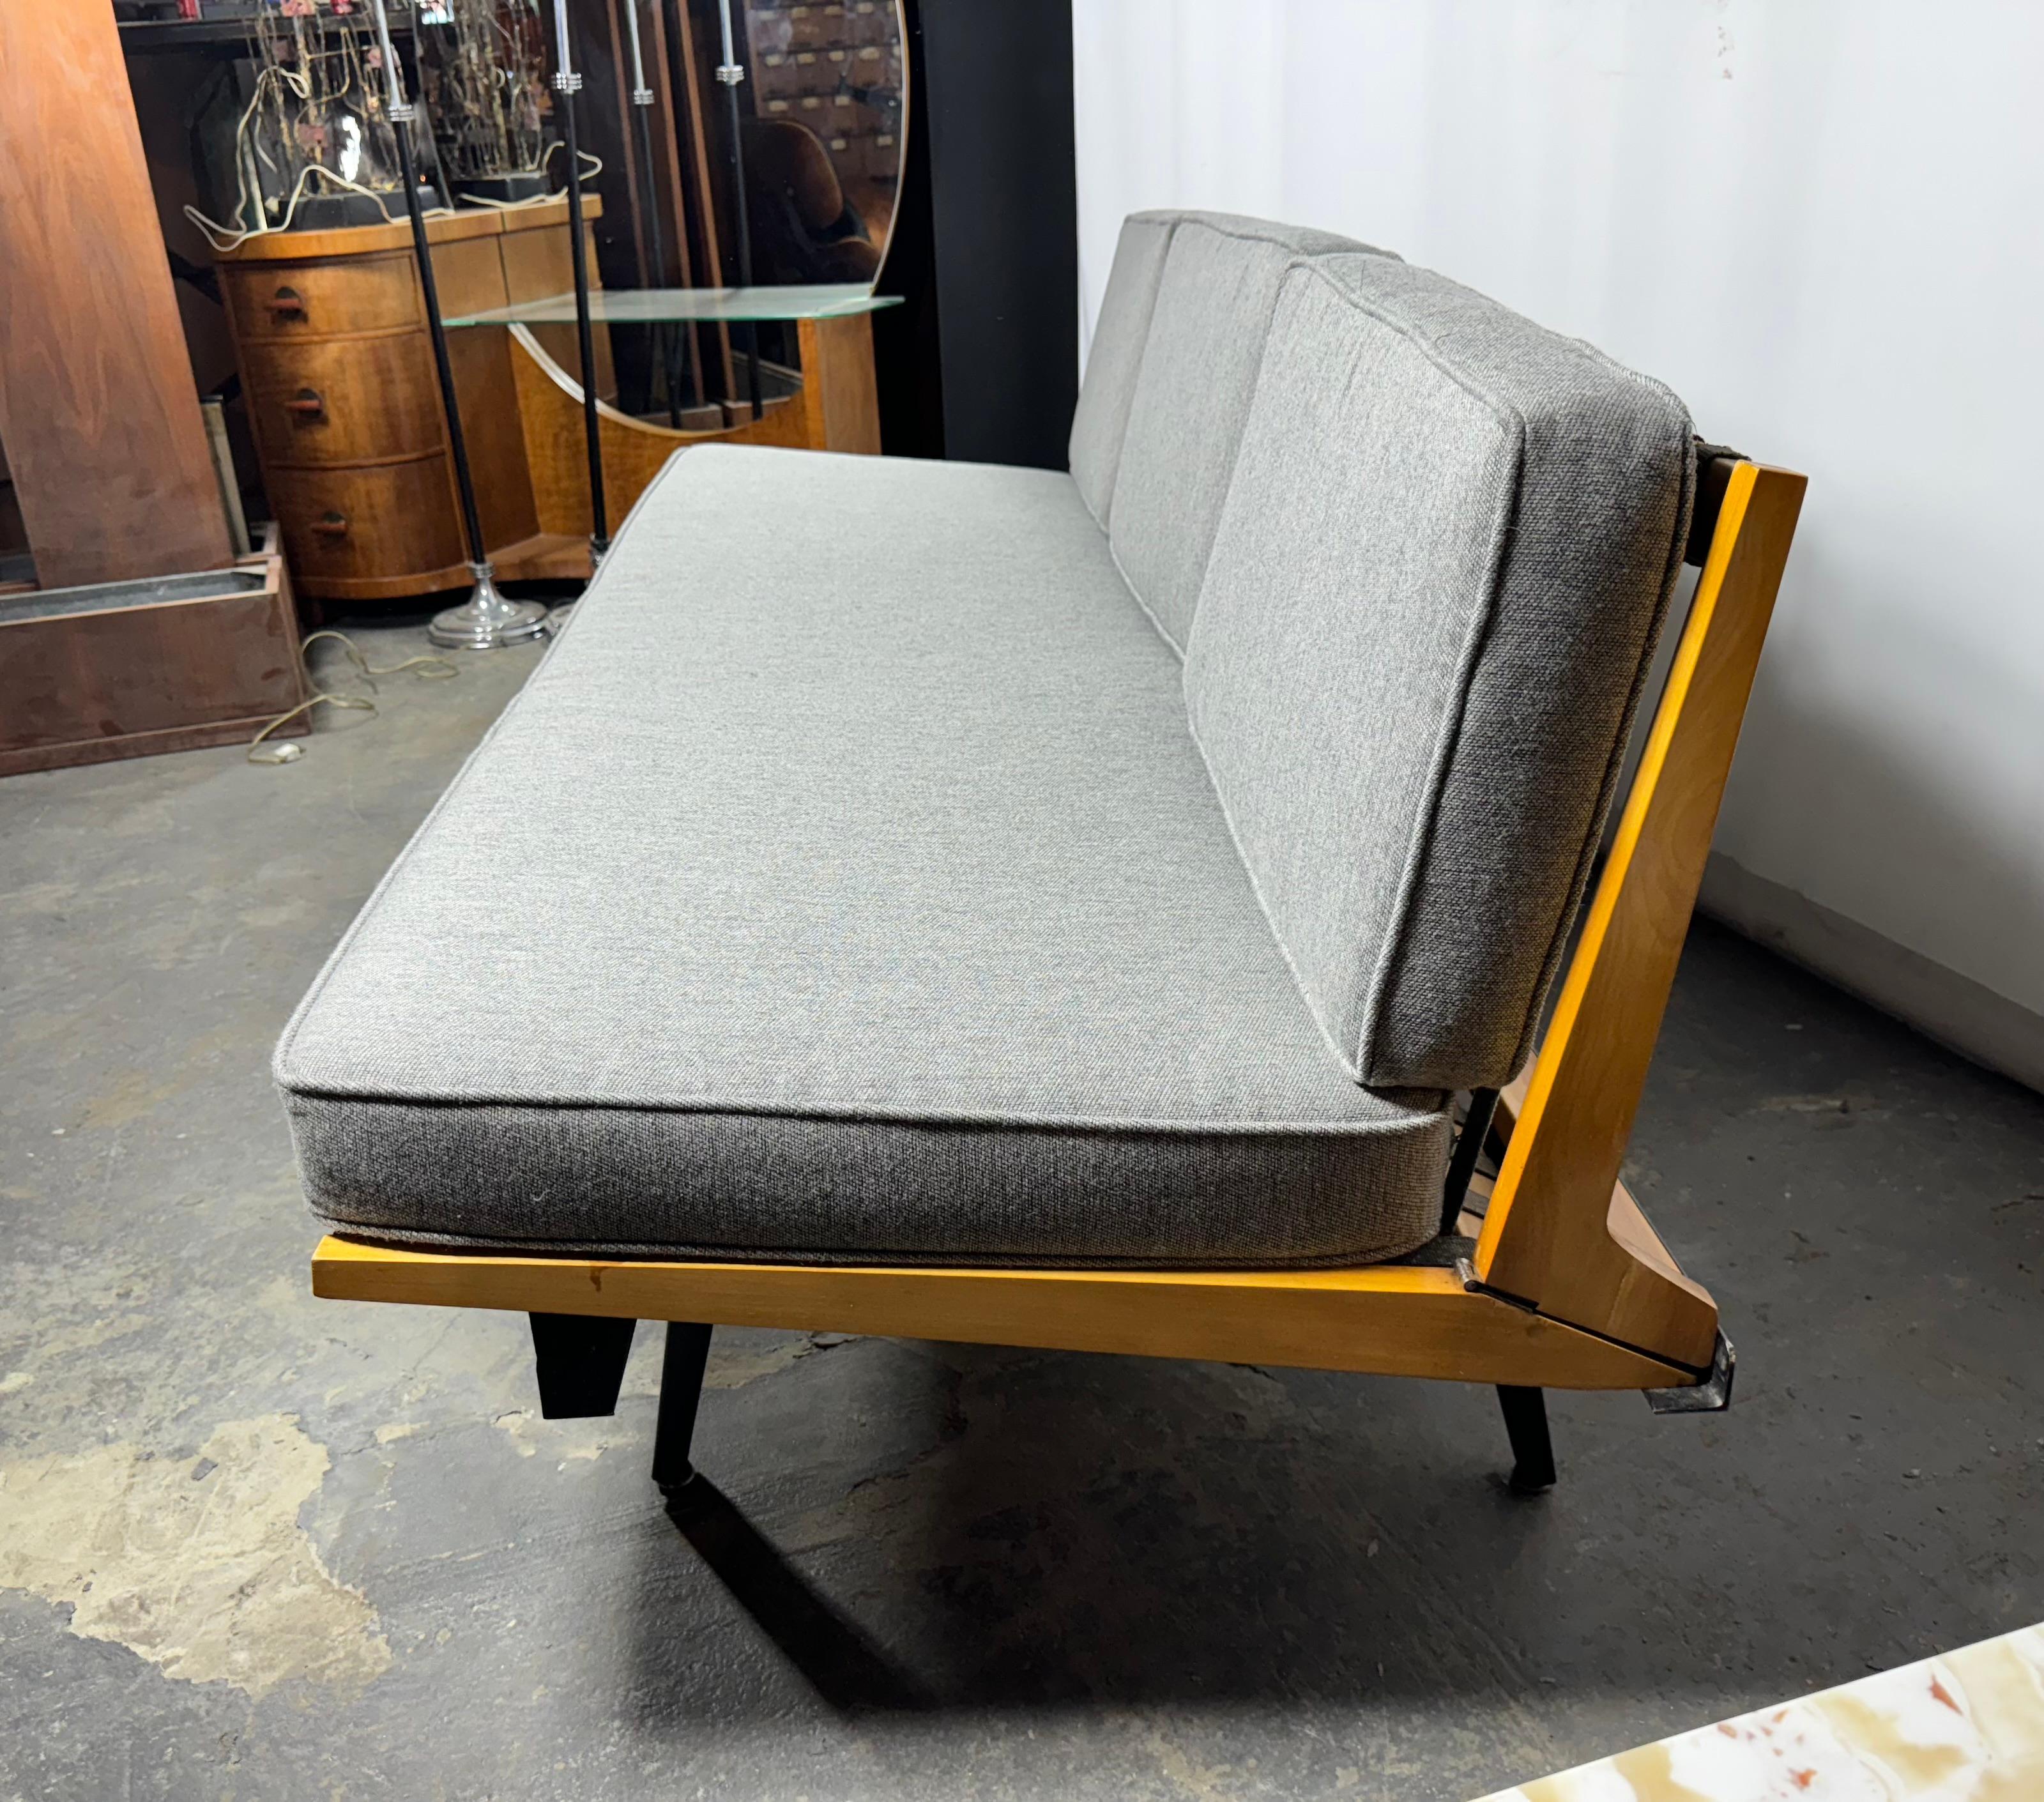 Early Production George Nelson / Herman Miller Modular Steel Frame Sofa,, Professionally reupholstered. Stunning gray wool fabric.  Retains original steel frame , three segmented folding seats in birch, also retains its original strapping..Classic